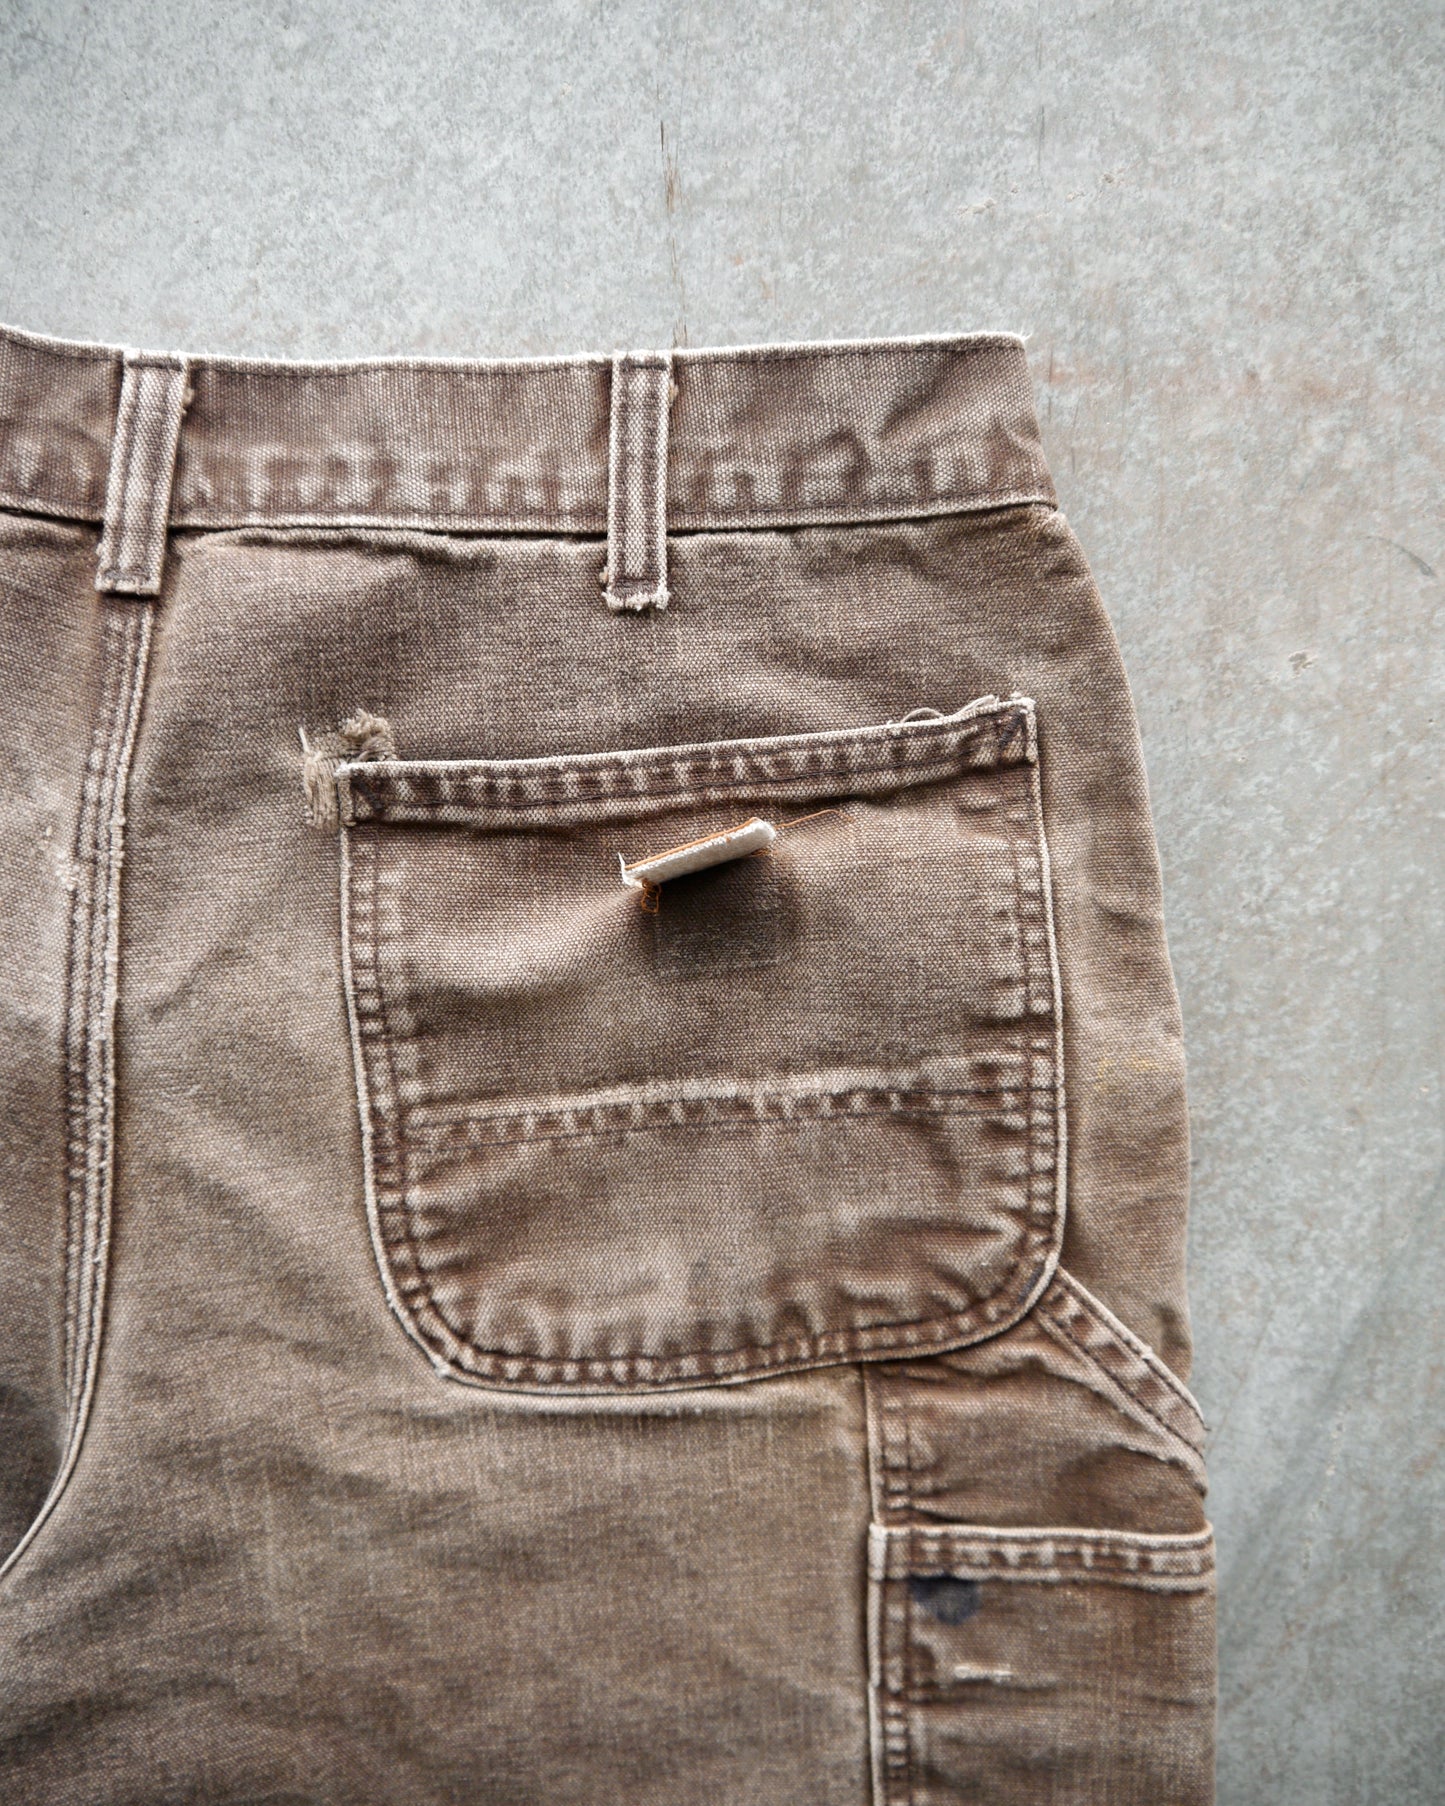 90s Carhartt Thrashed Faded Brown Work Pants (33x29)